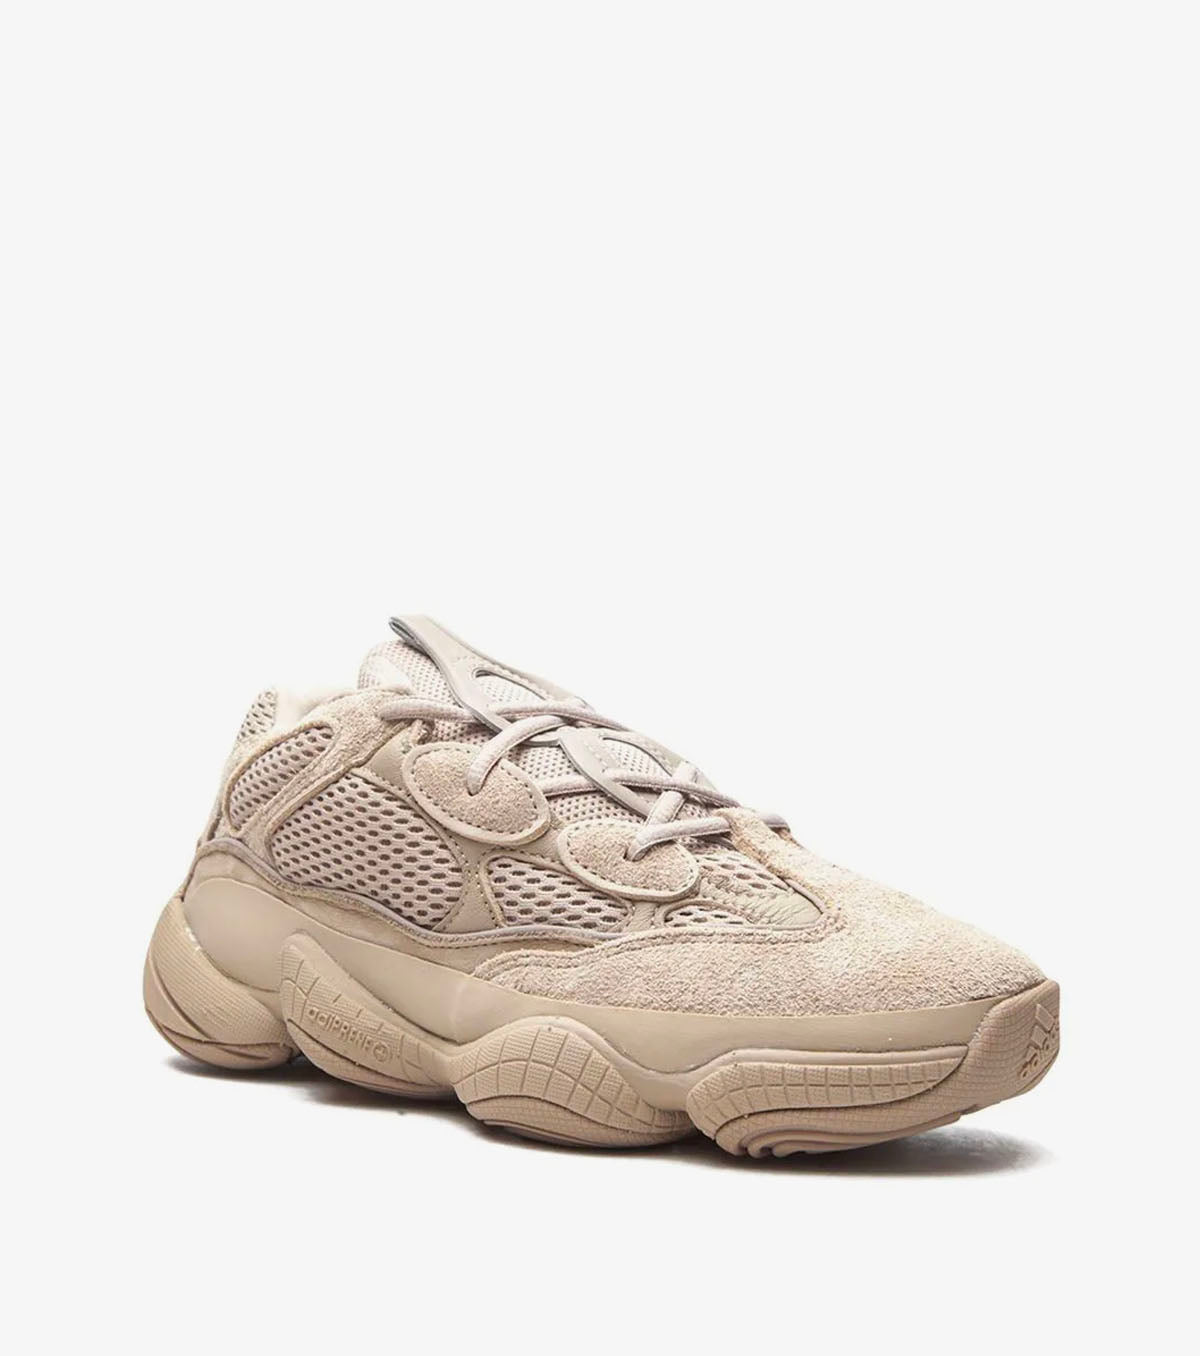 Yeezy 500 "Taupe" sneakers - SNKRBASE